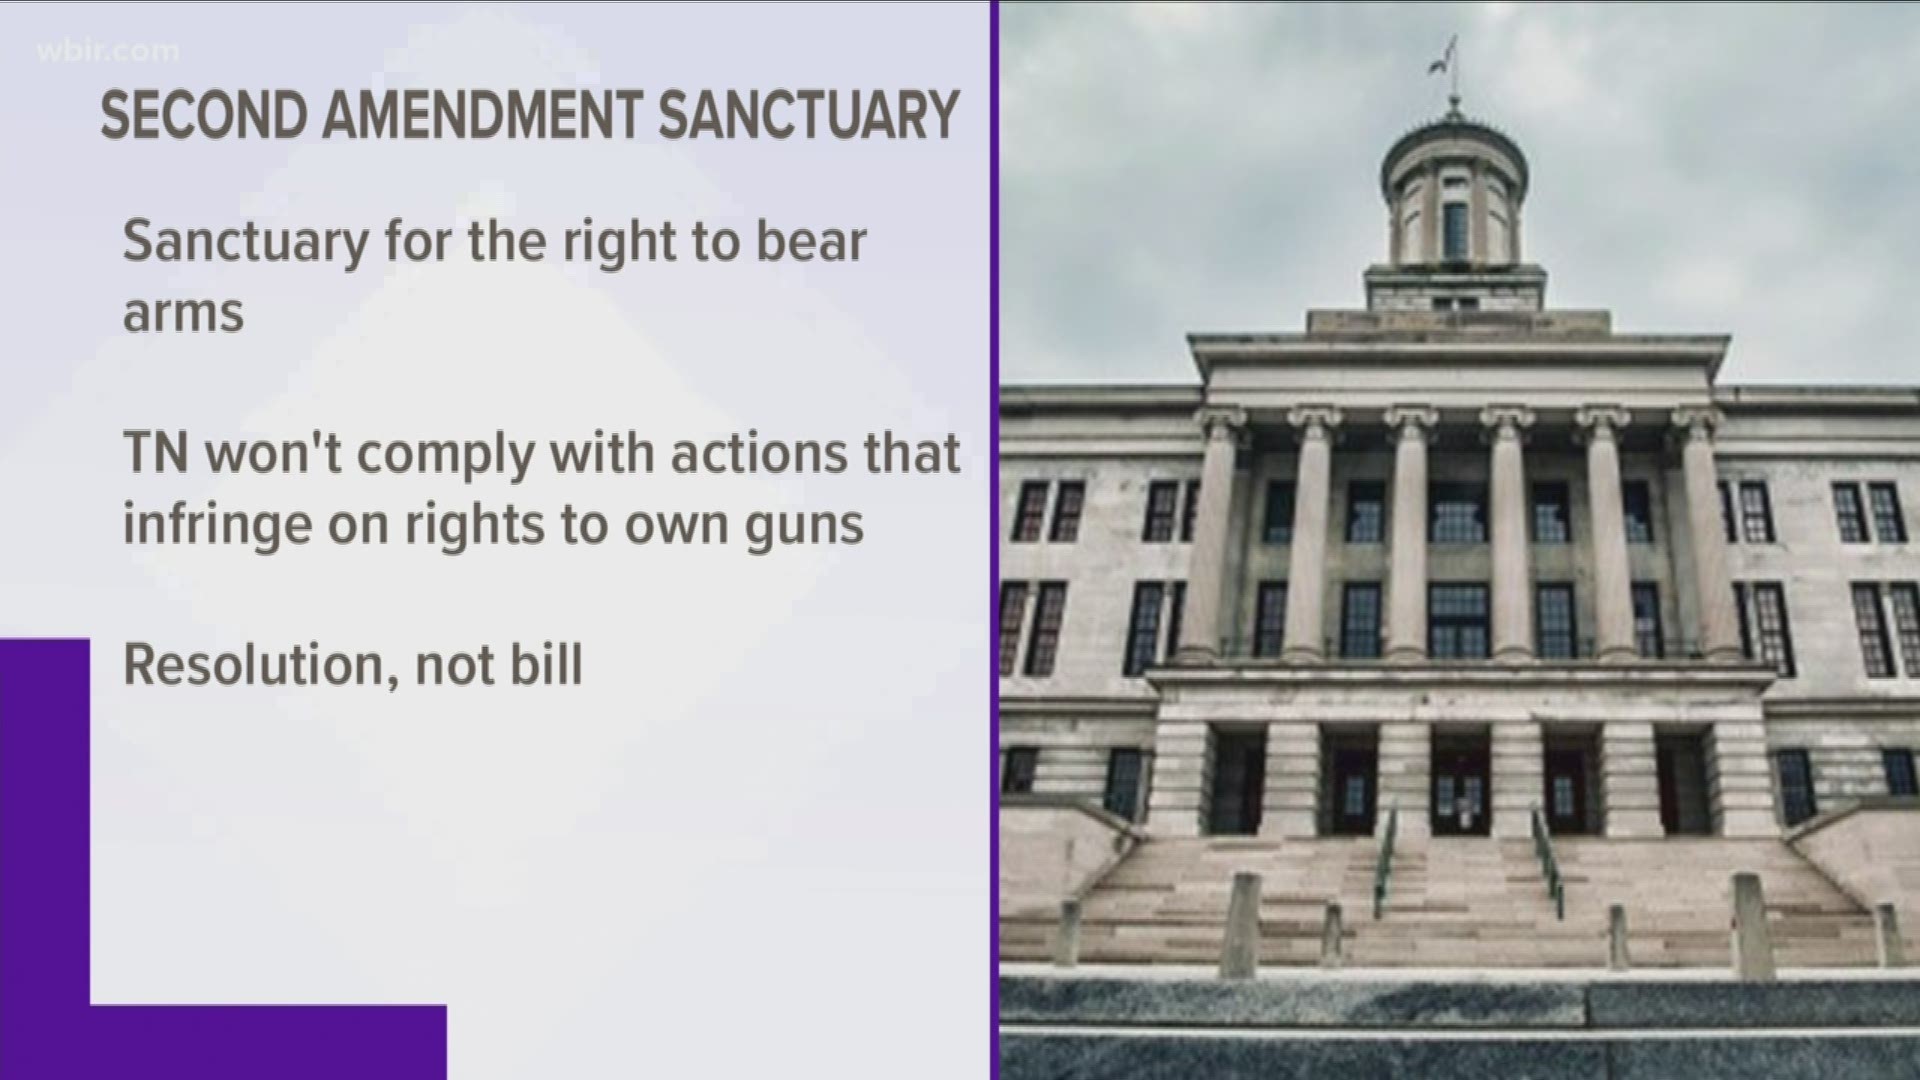 A resolution in the legislature would make the entire state a so-called sanctuary for the right to bear arms.